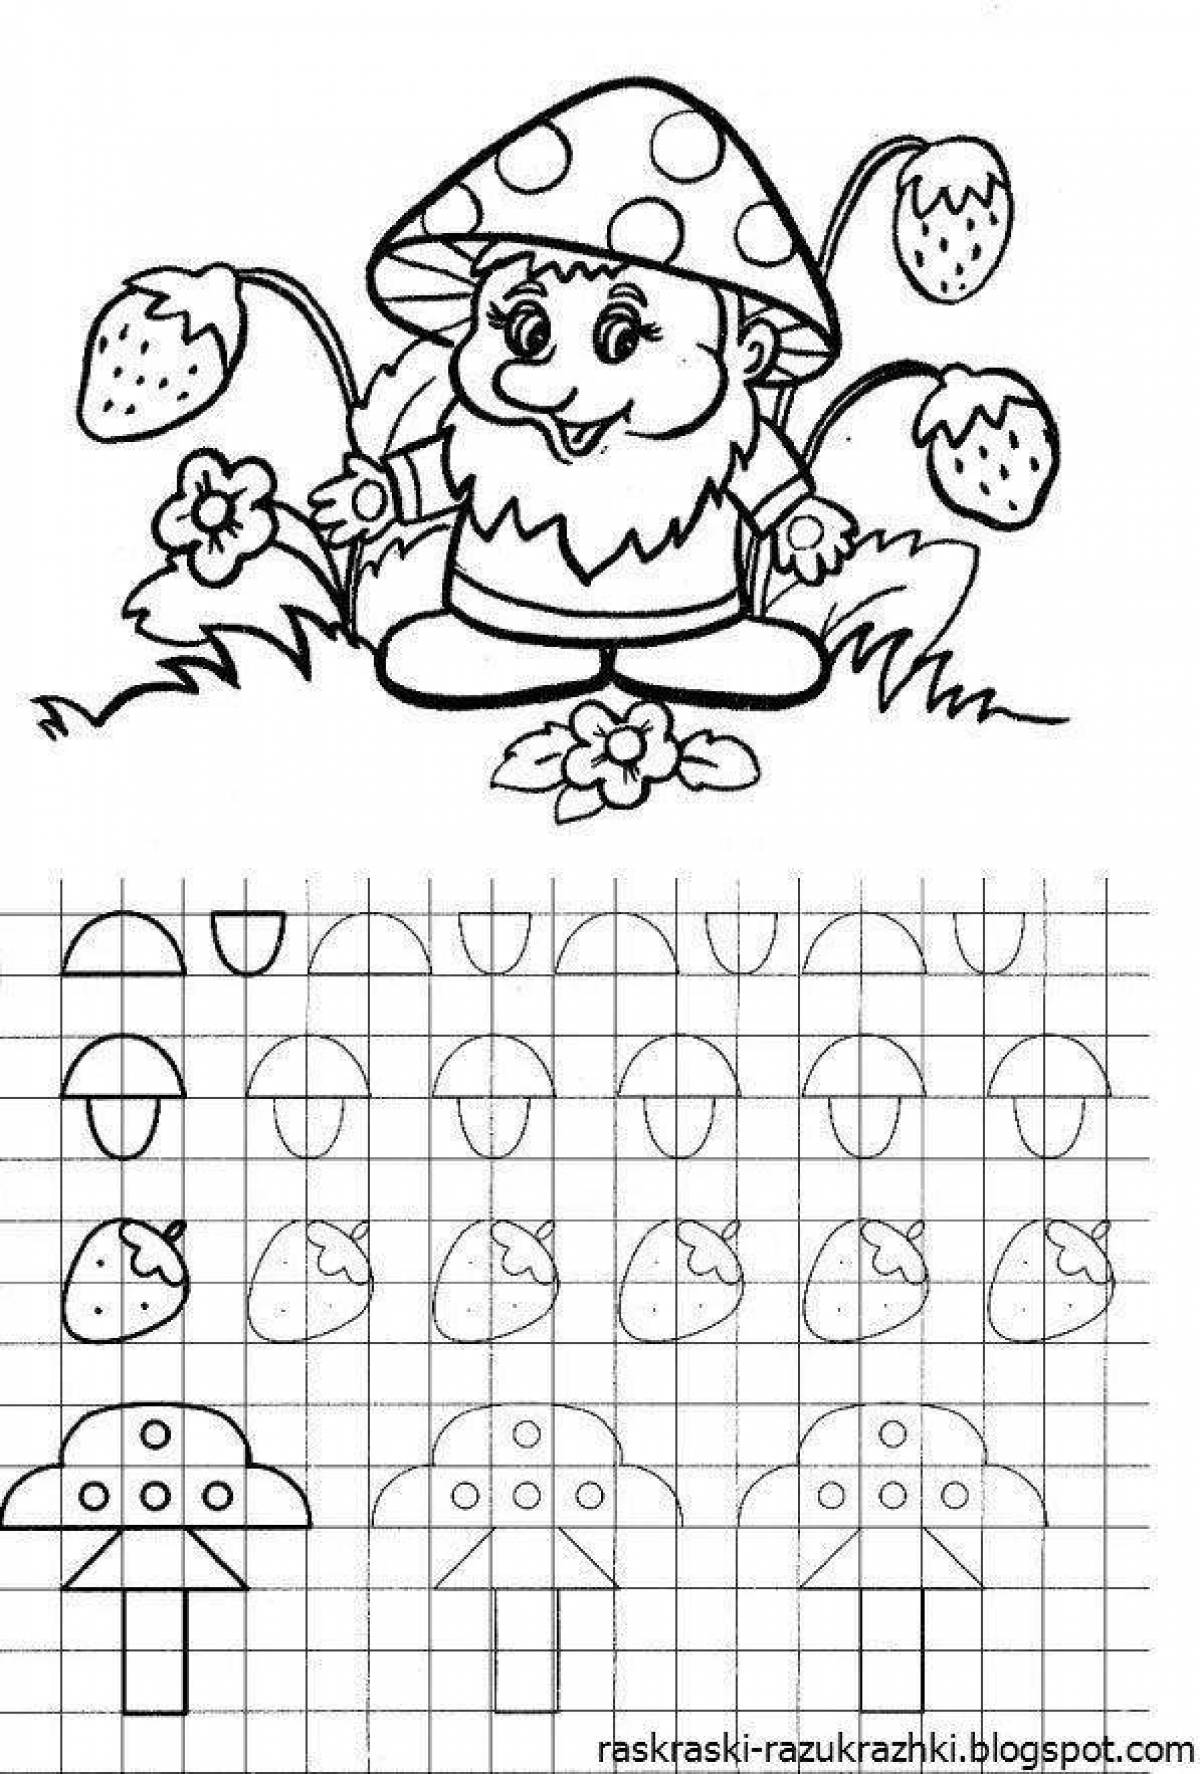 Amazing math coloring book for 4-5 year olds